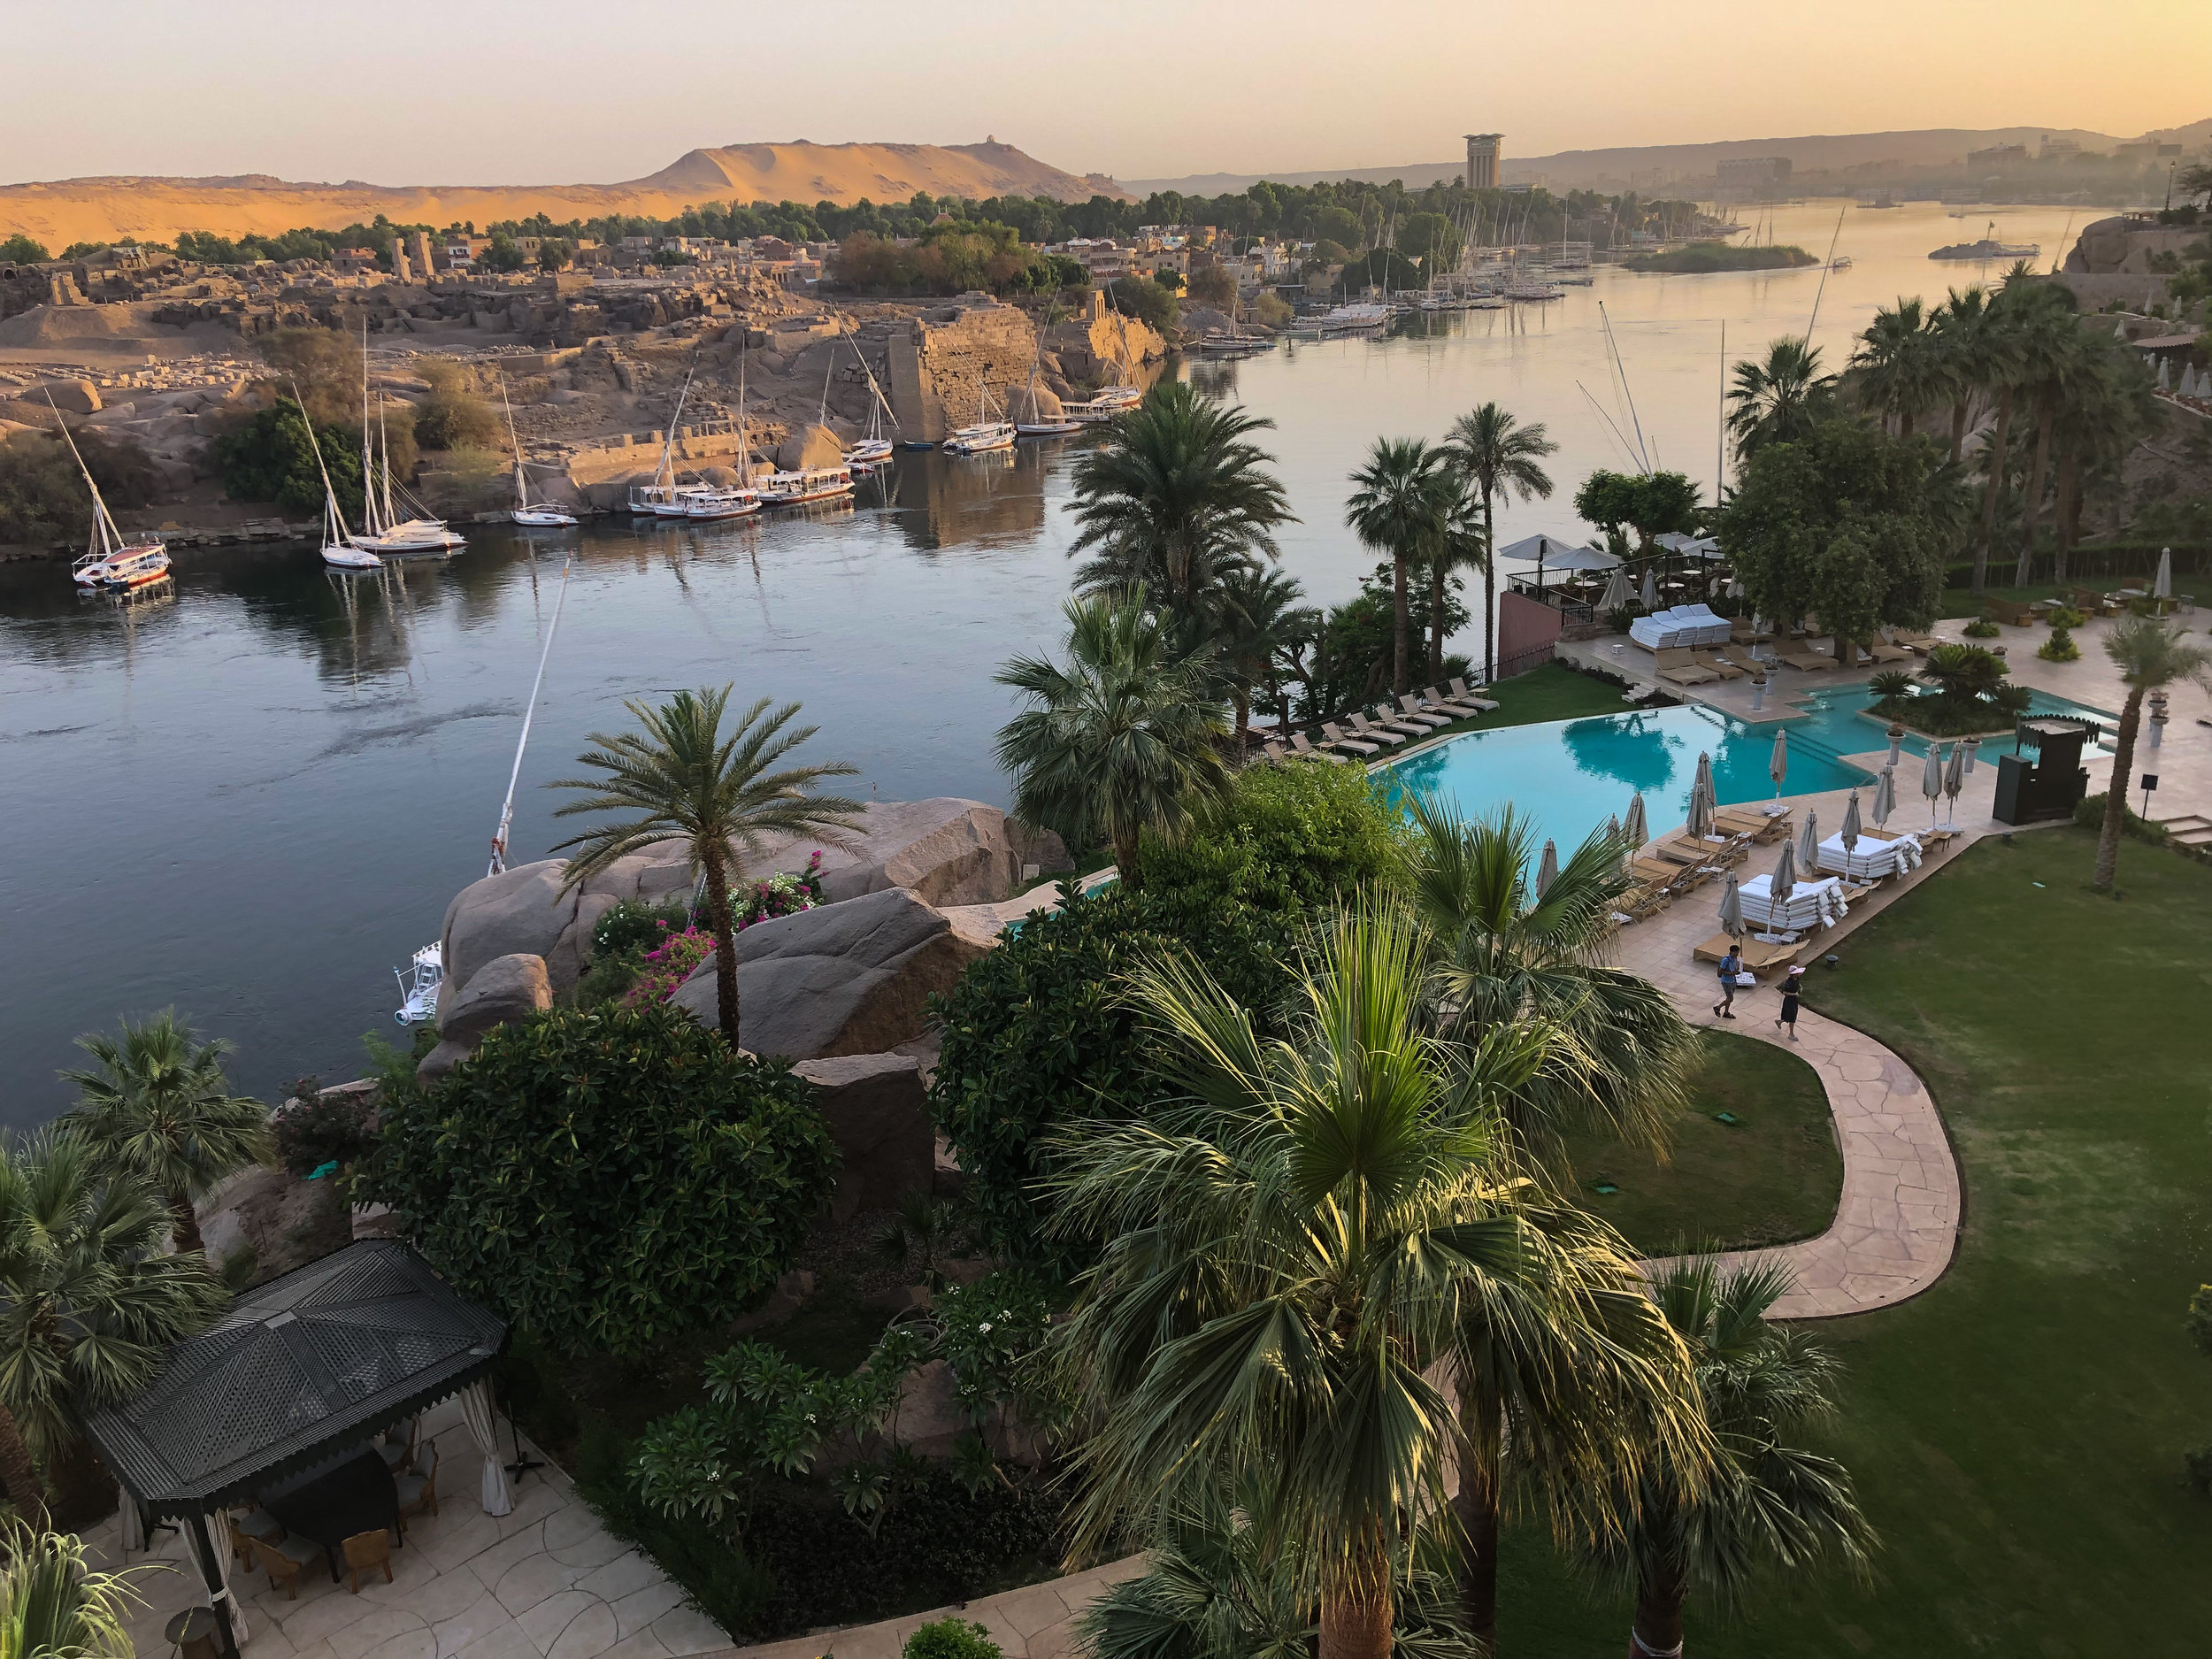 View from The Old Cataract, Aswan - Egypt - Wild Earth Expeditions